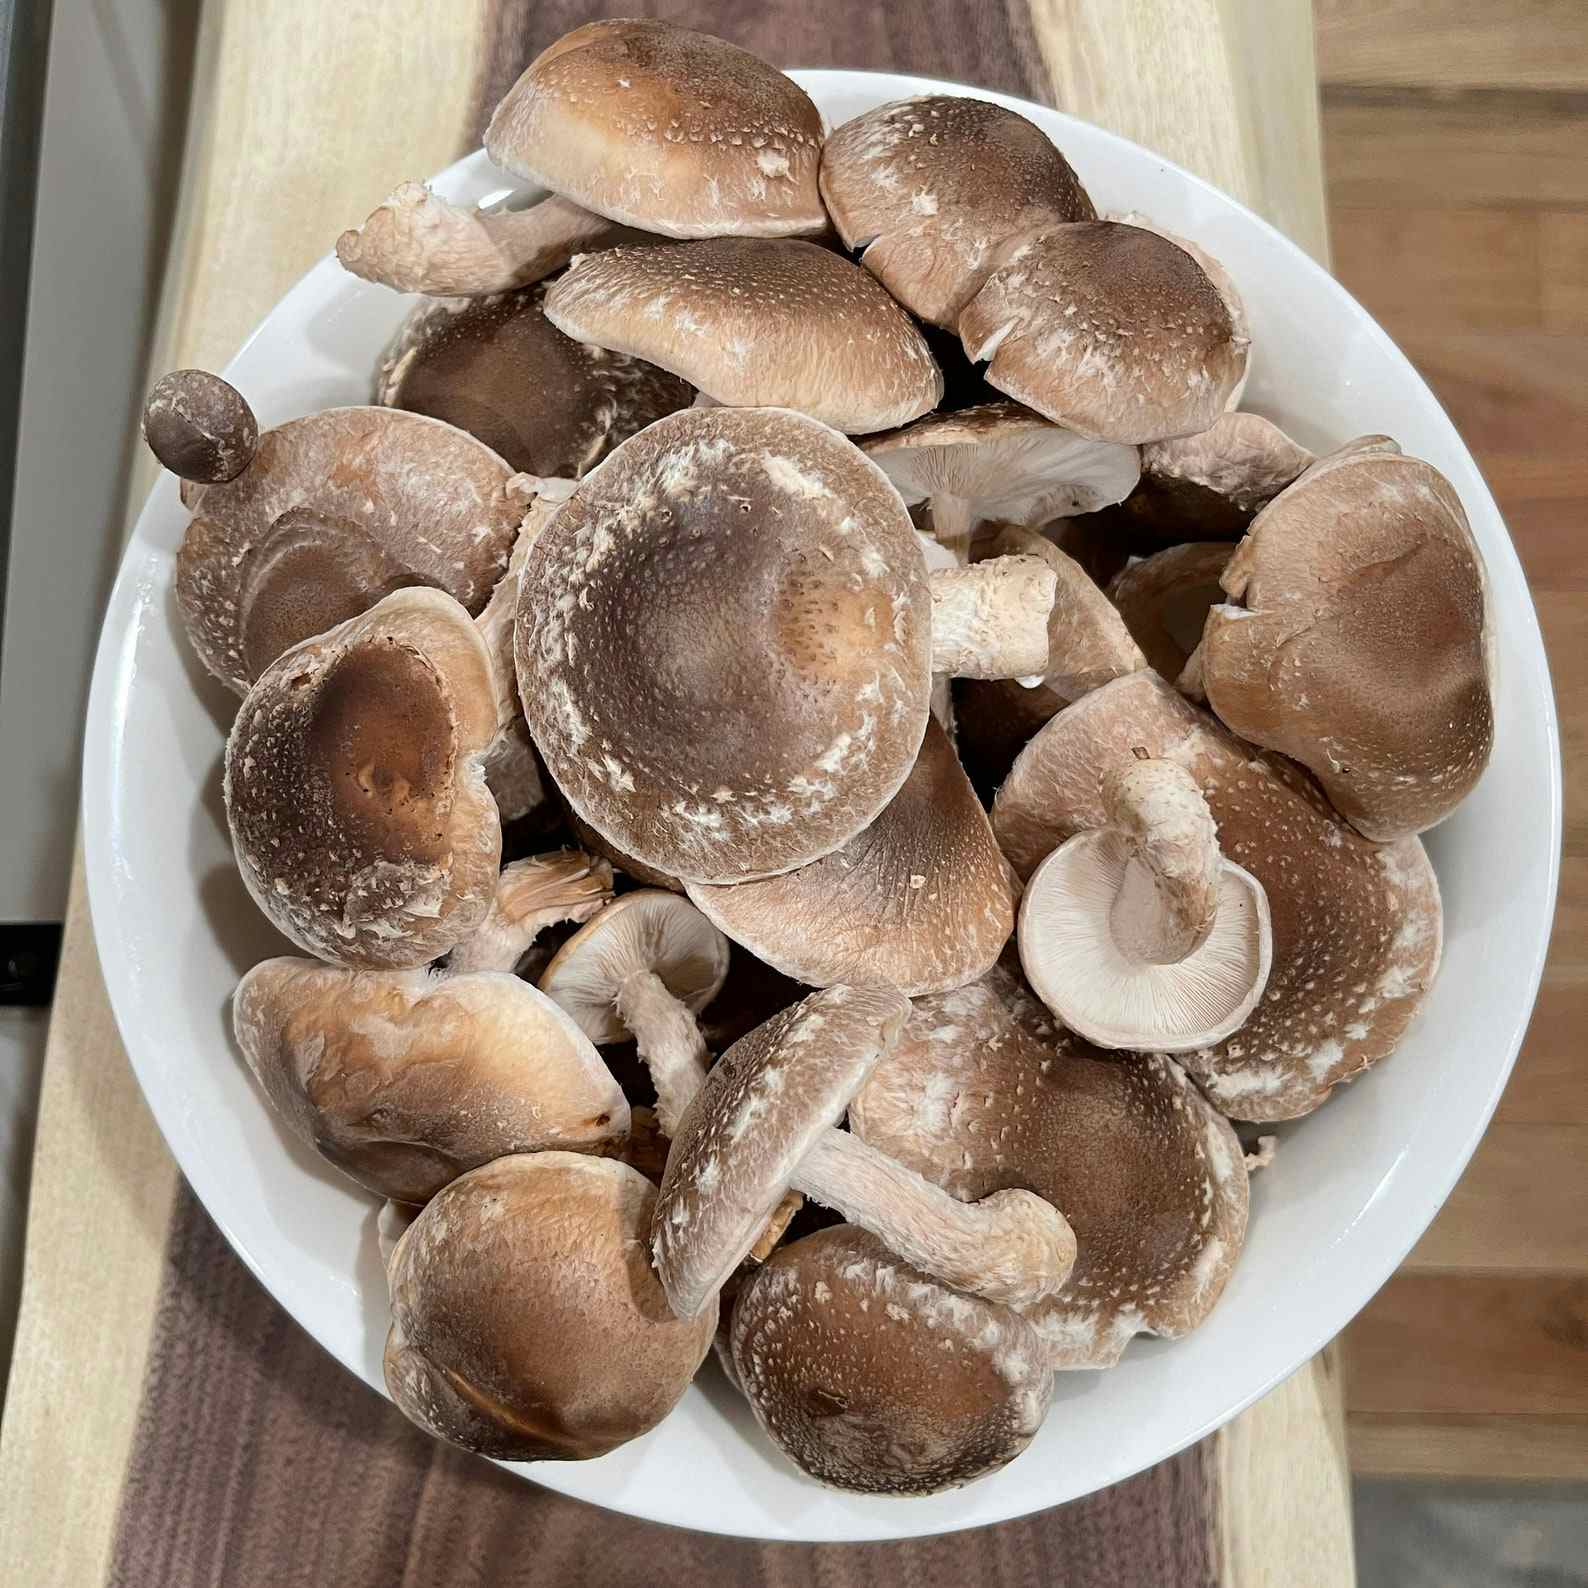 Dehydrated and freshly harvested Shiitake mushrooms-all organic ingredients/substrates